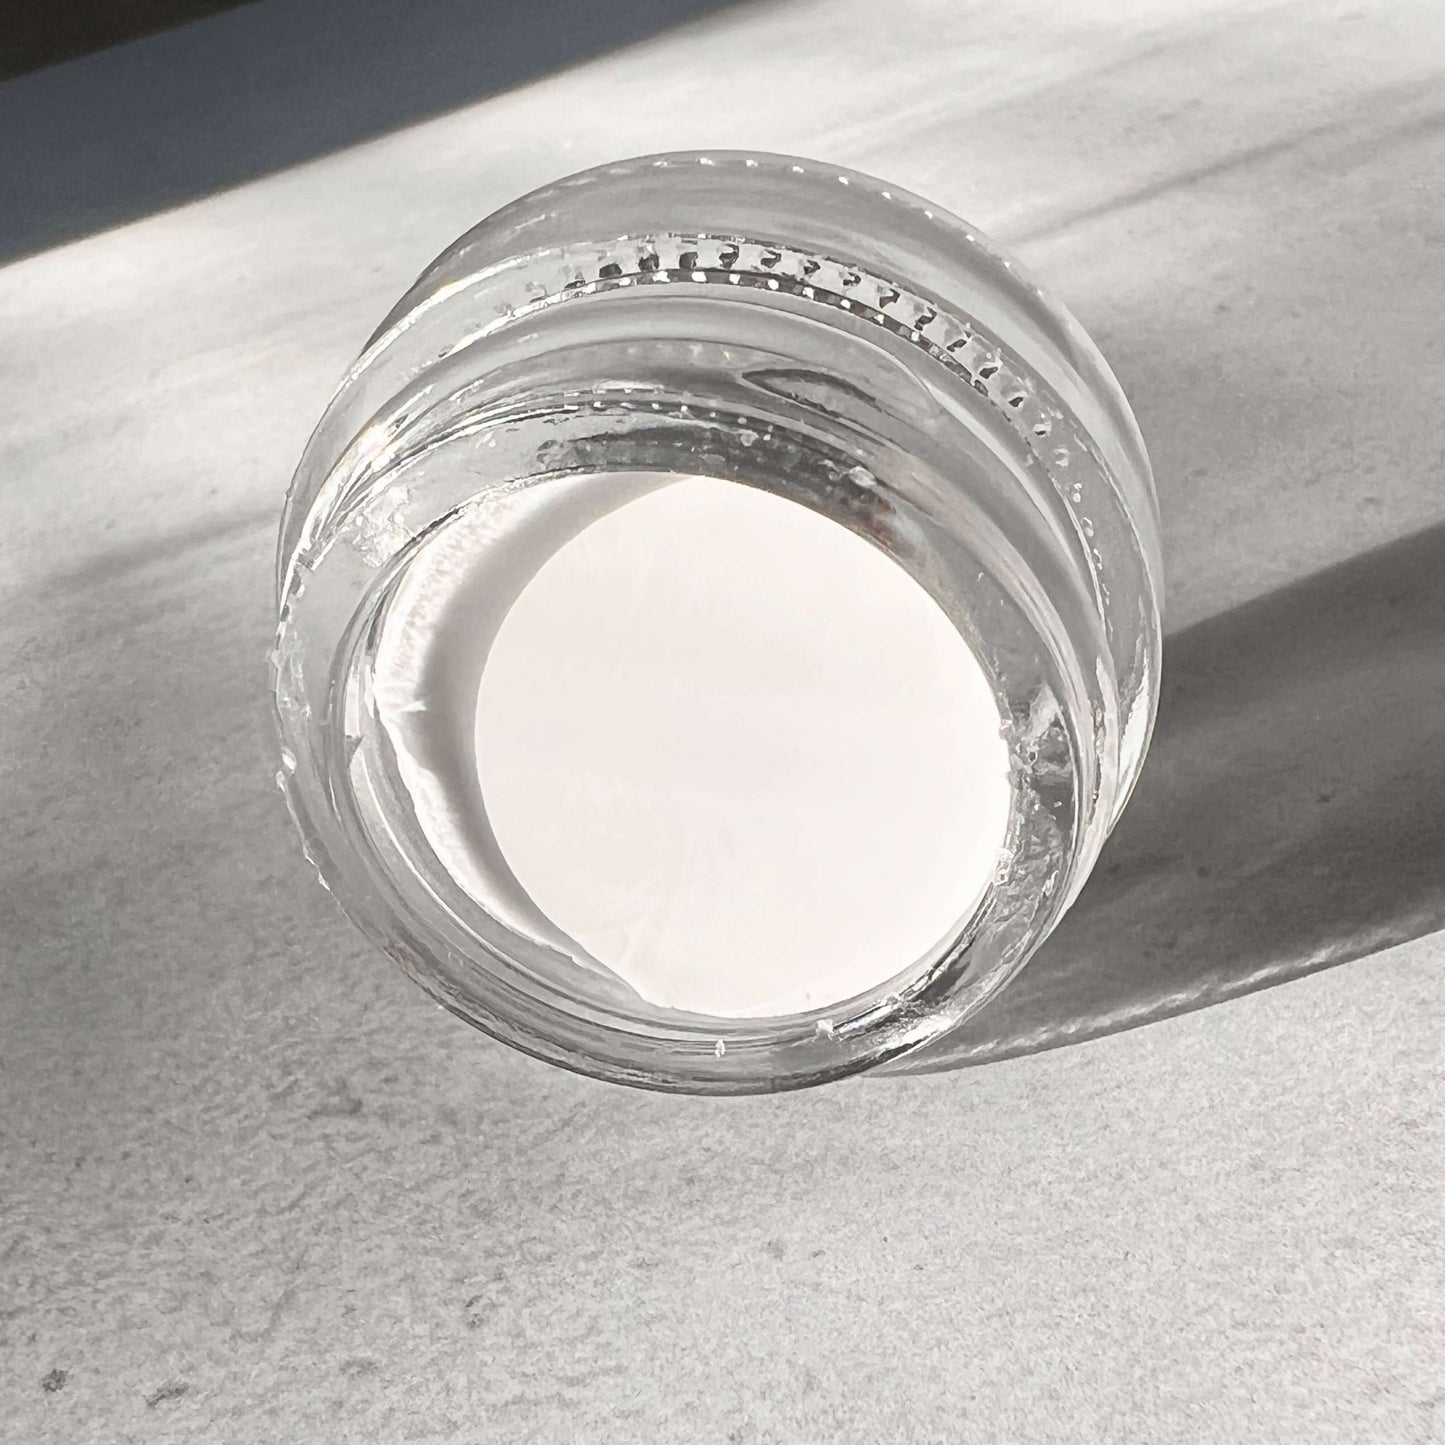 Creamy gel eyeliner in a glass pot rests on its side. This position shows you that the white eyeliner is creamy and thick.